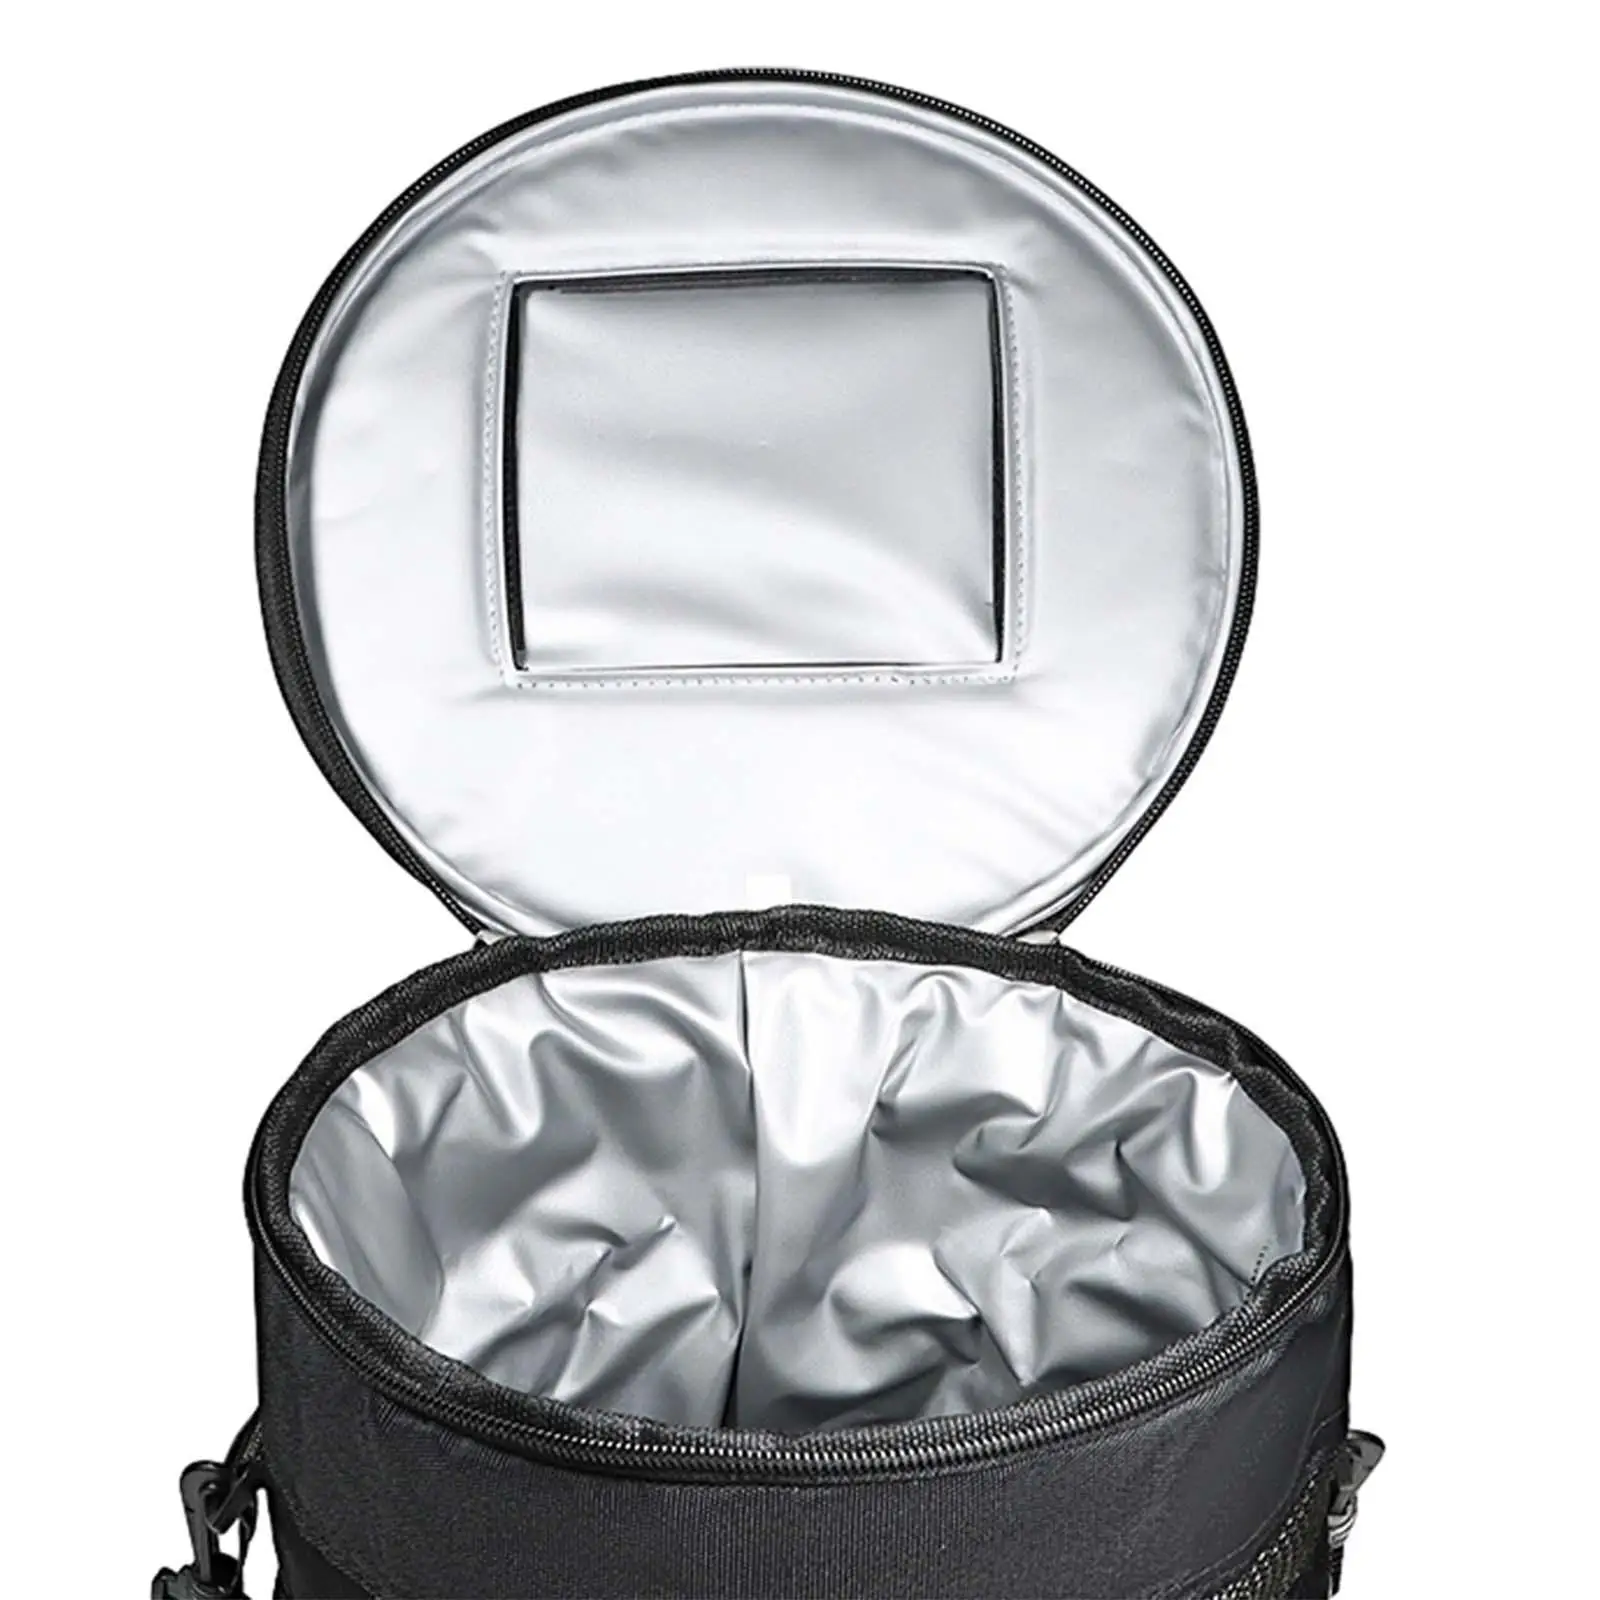 Insulated Cooler Bag Container Insulated Bag for Travel Camping Fishing